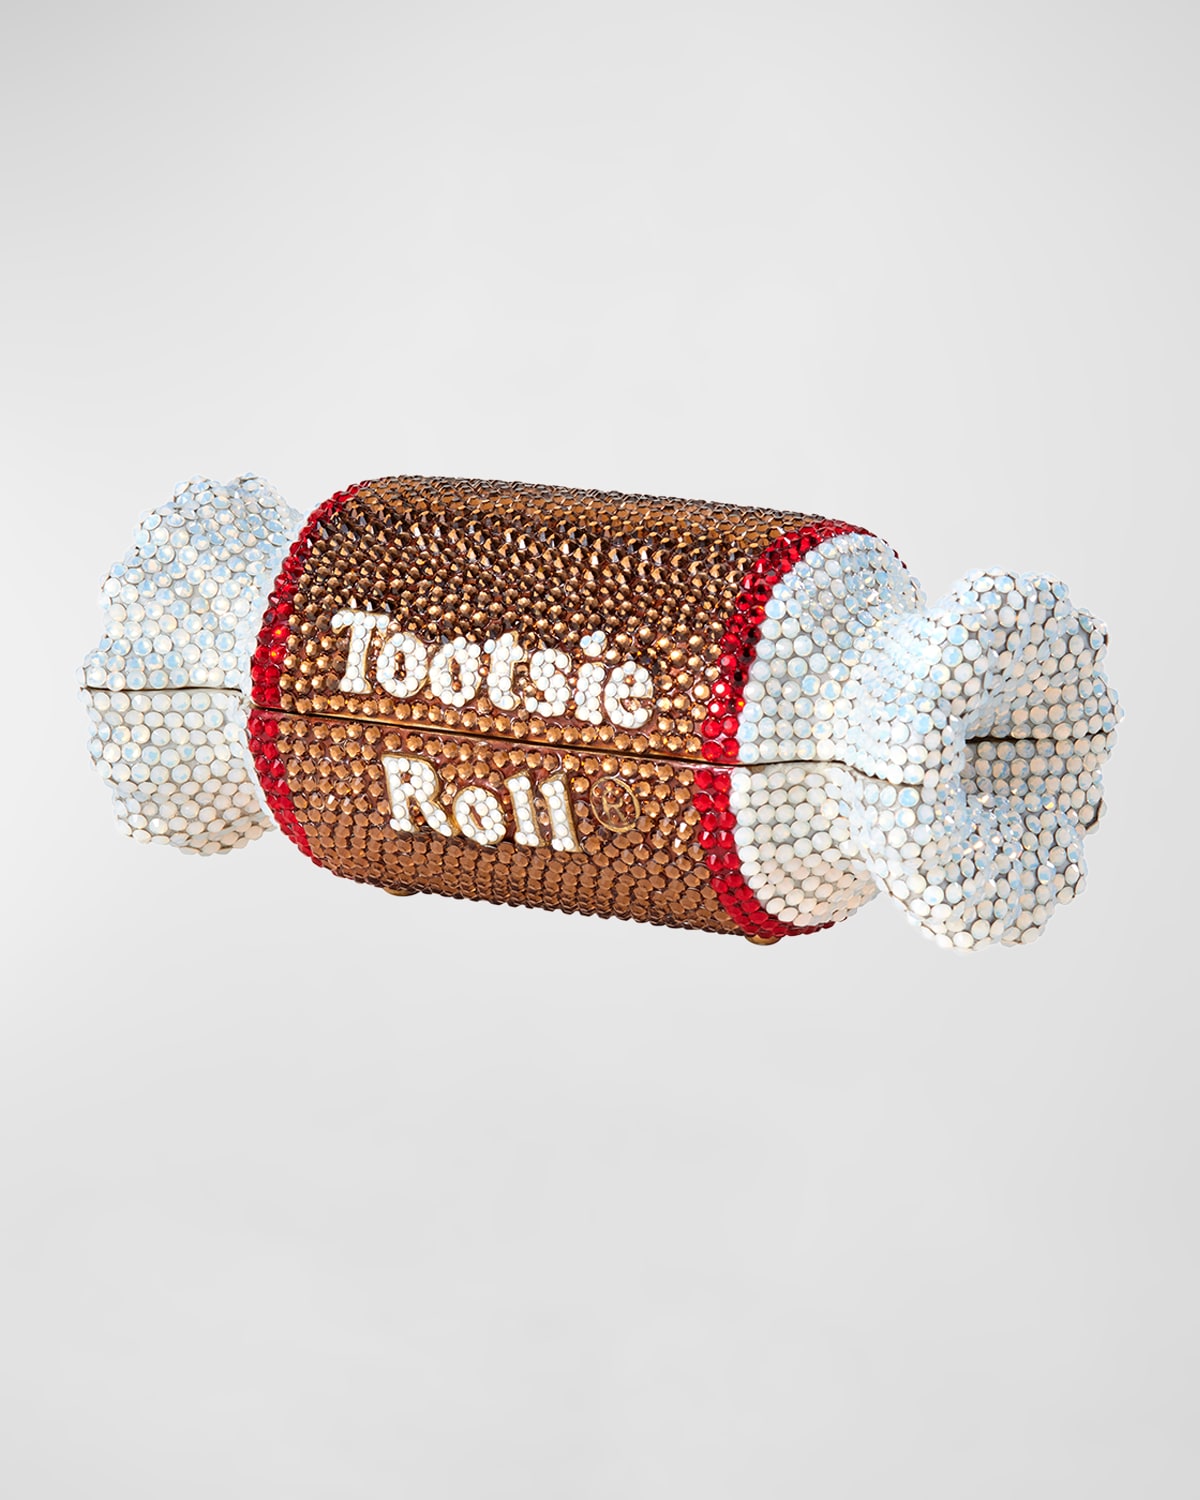 Jay Strongwater Tootsie Roll Rock Box